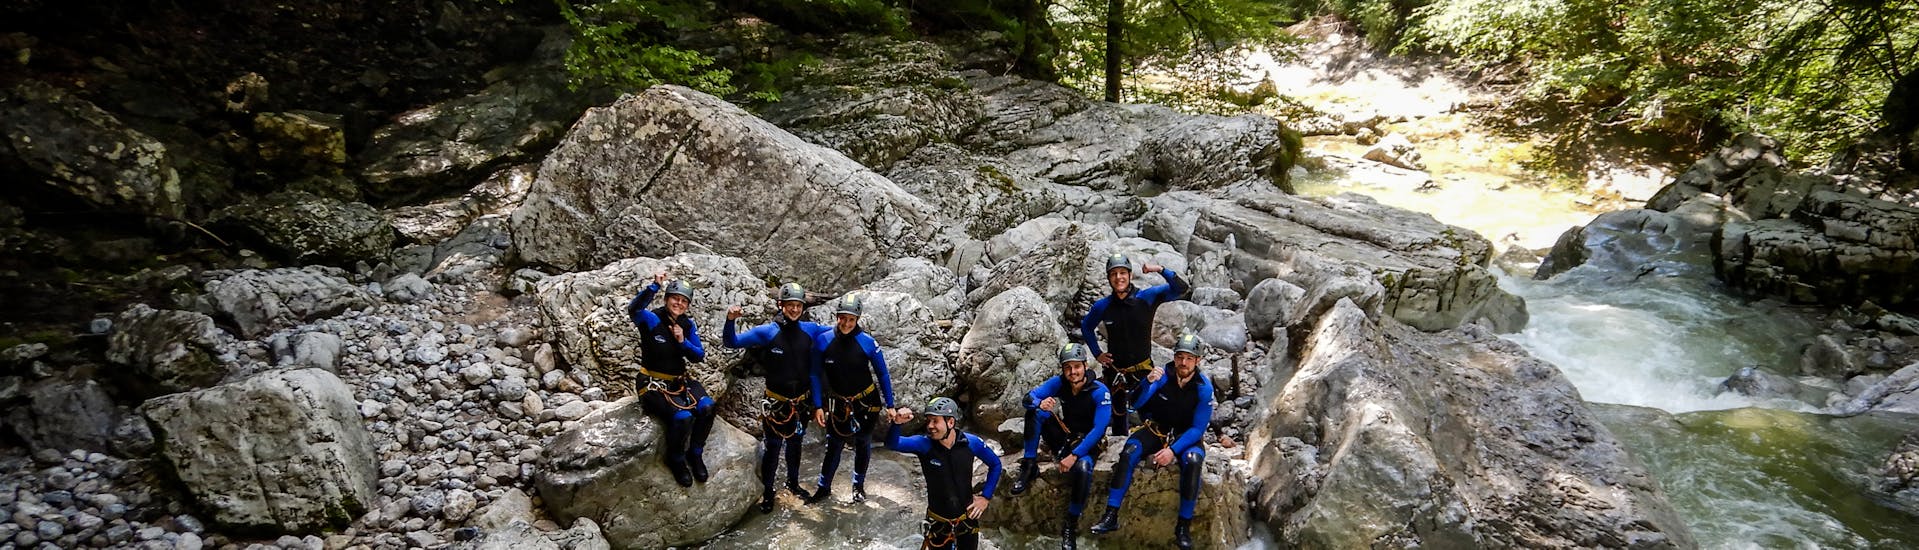 Canyoning facile à Erl.